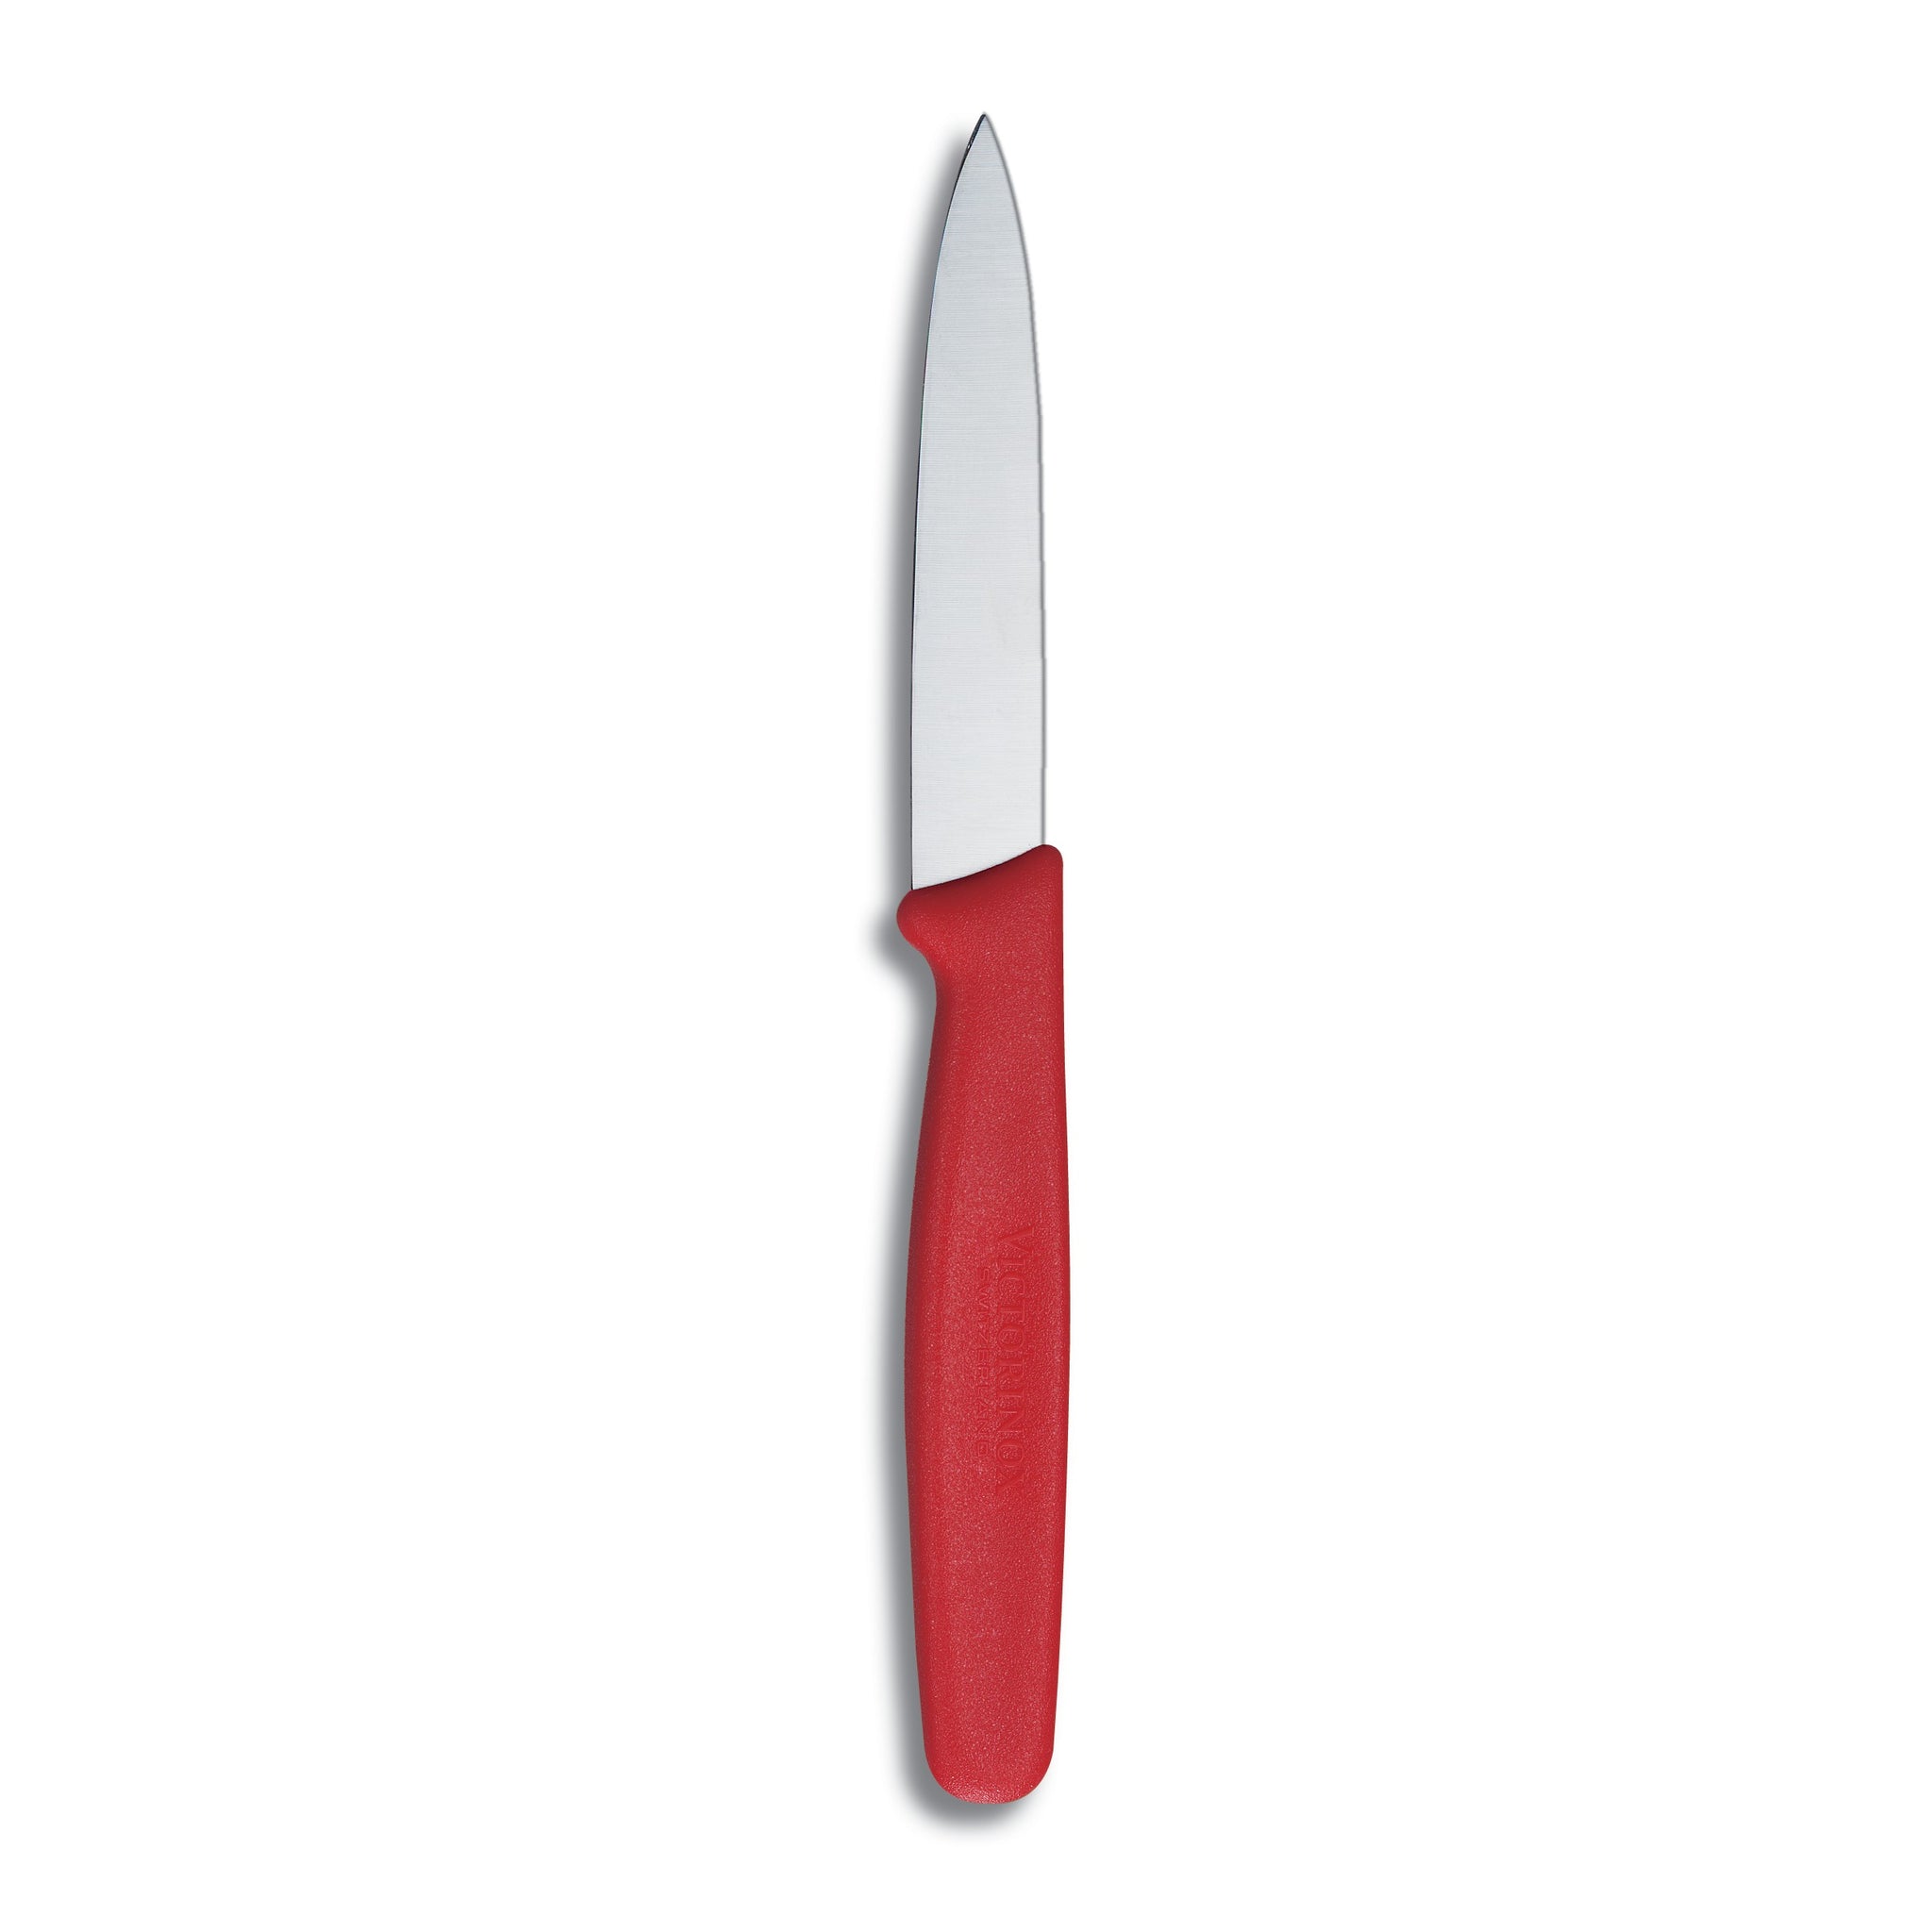 Victorinox 3.25" Paring Knife w/ Small Red Handle